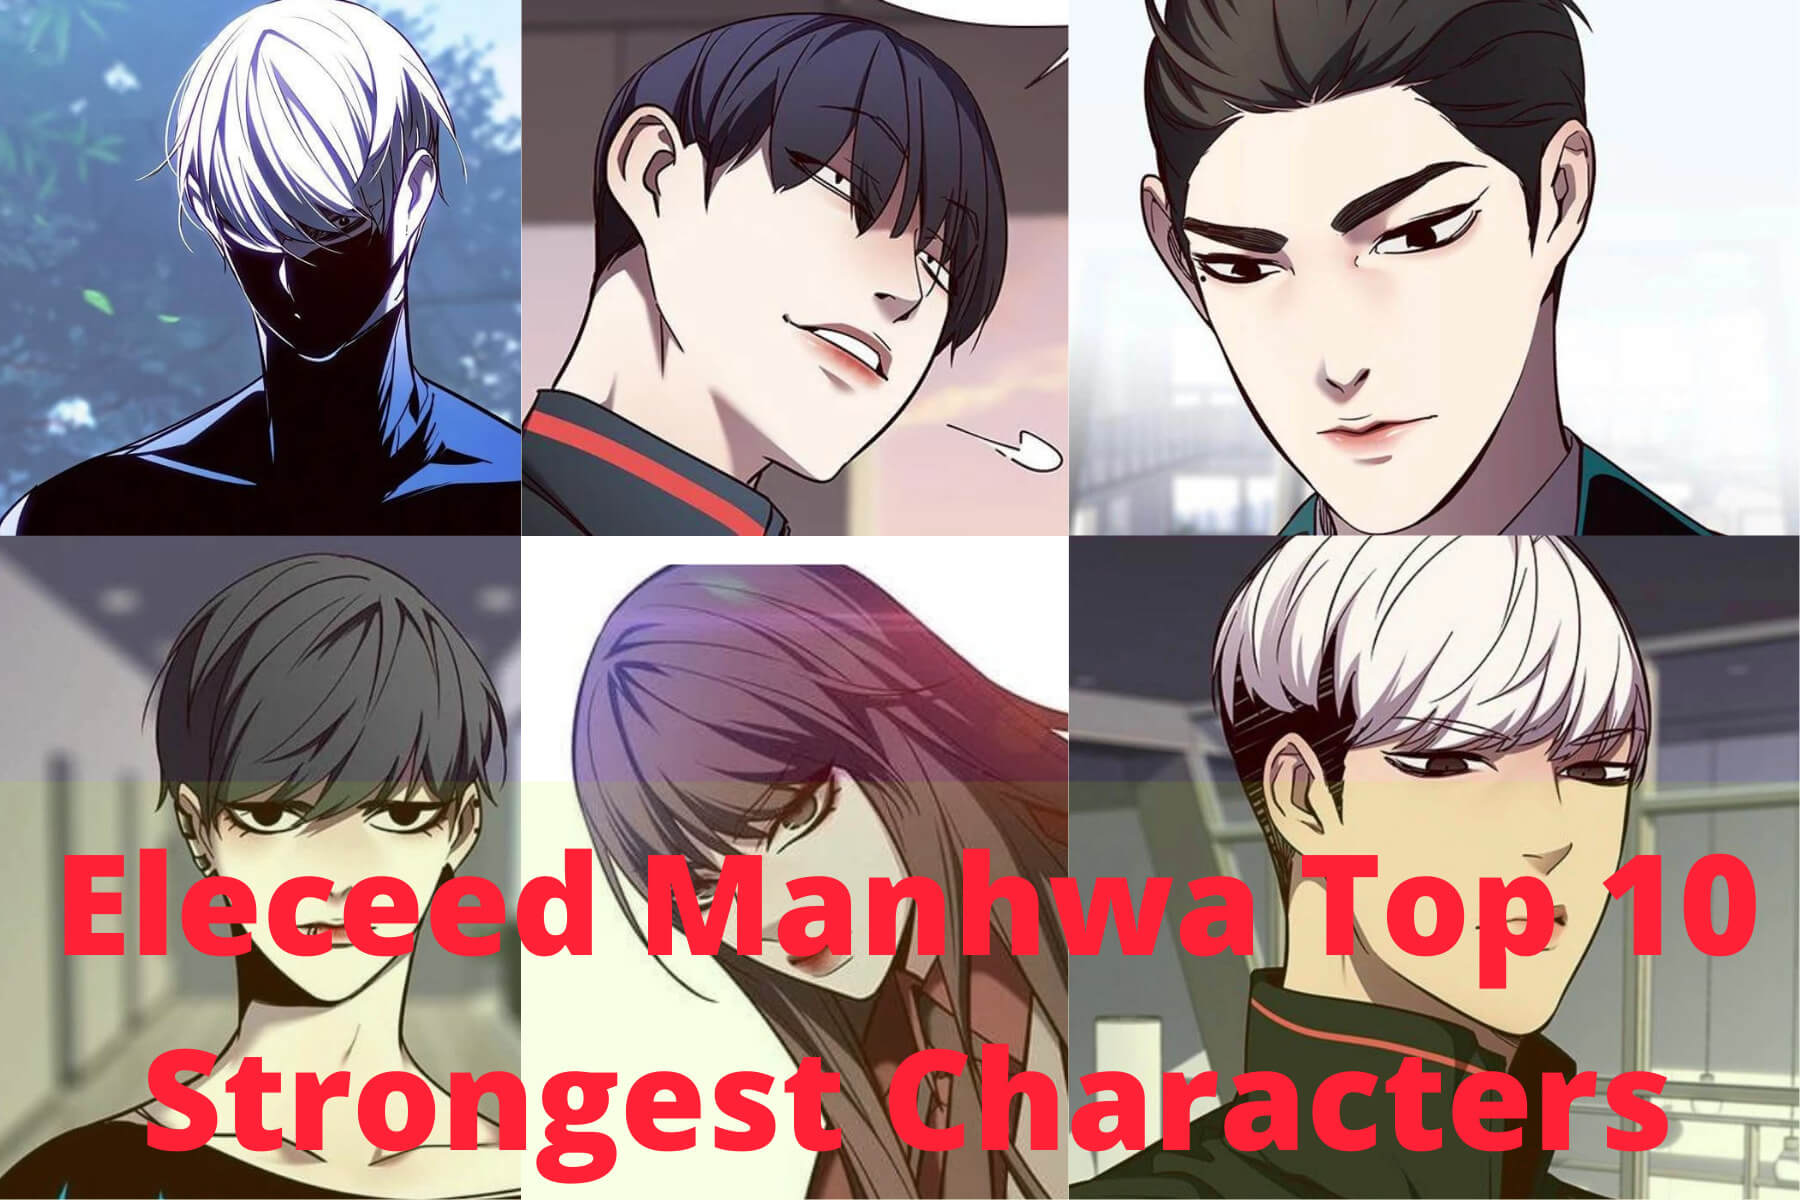 Eleceed Manhwa Top 10 Strongest Characters